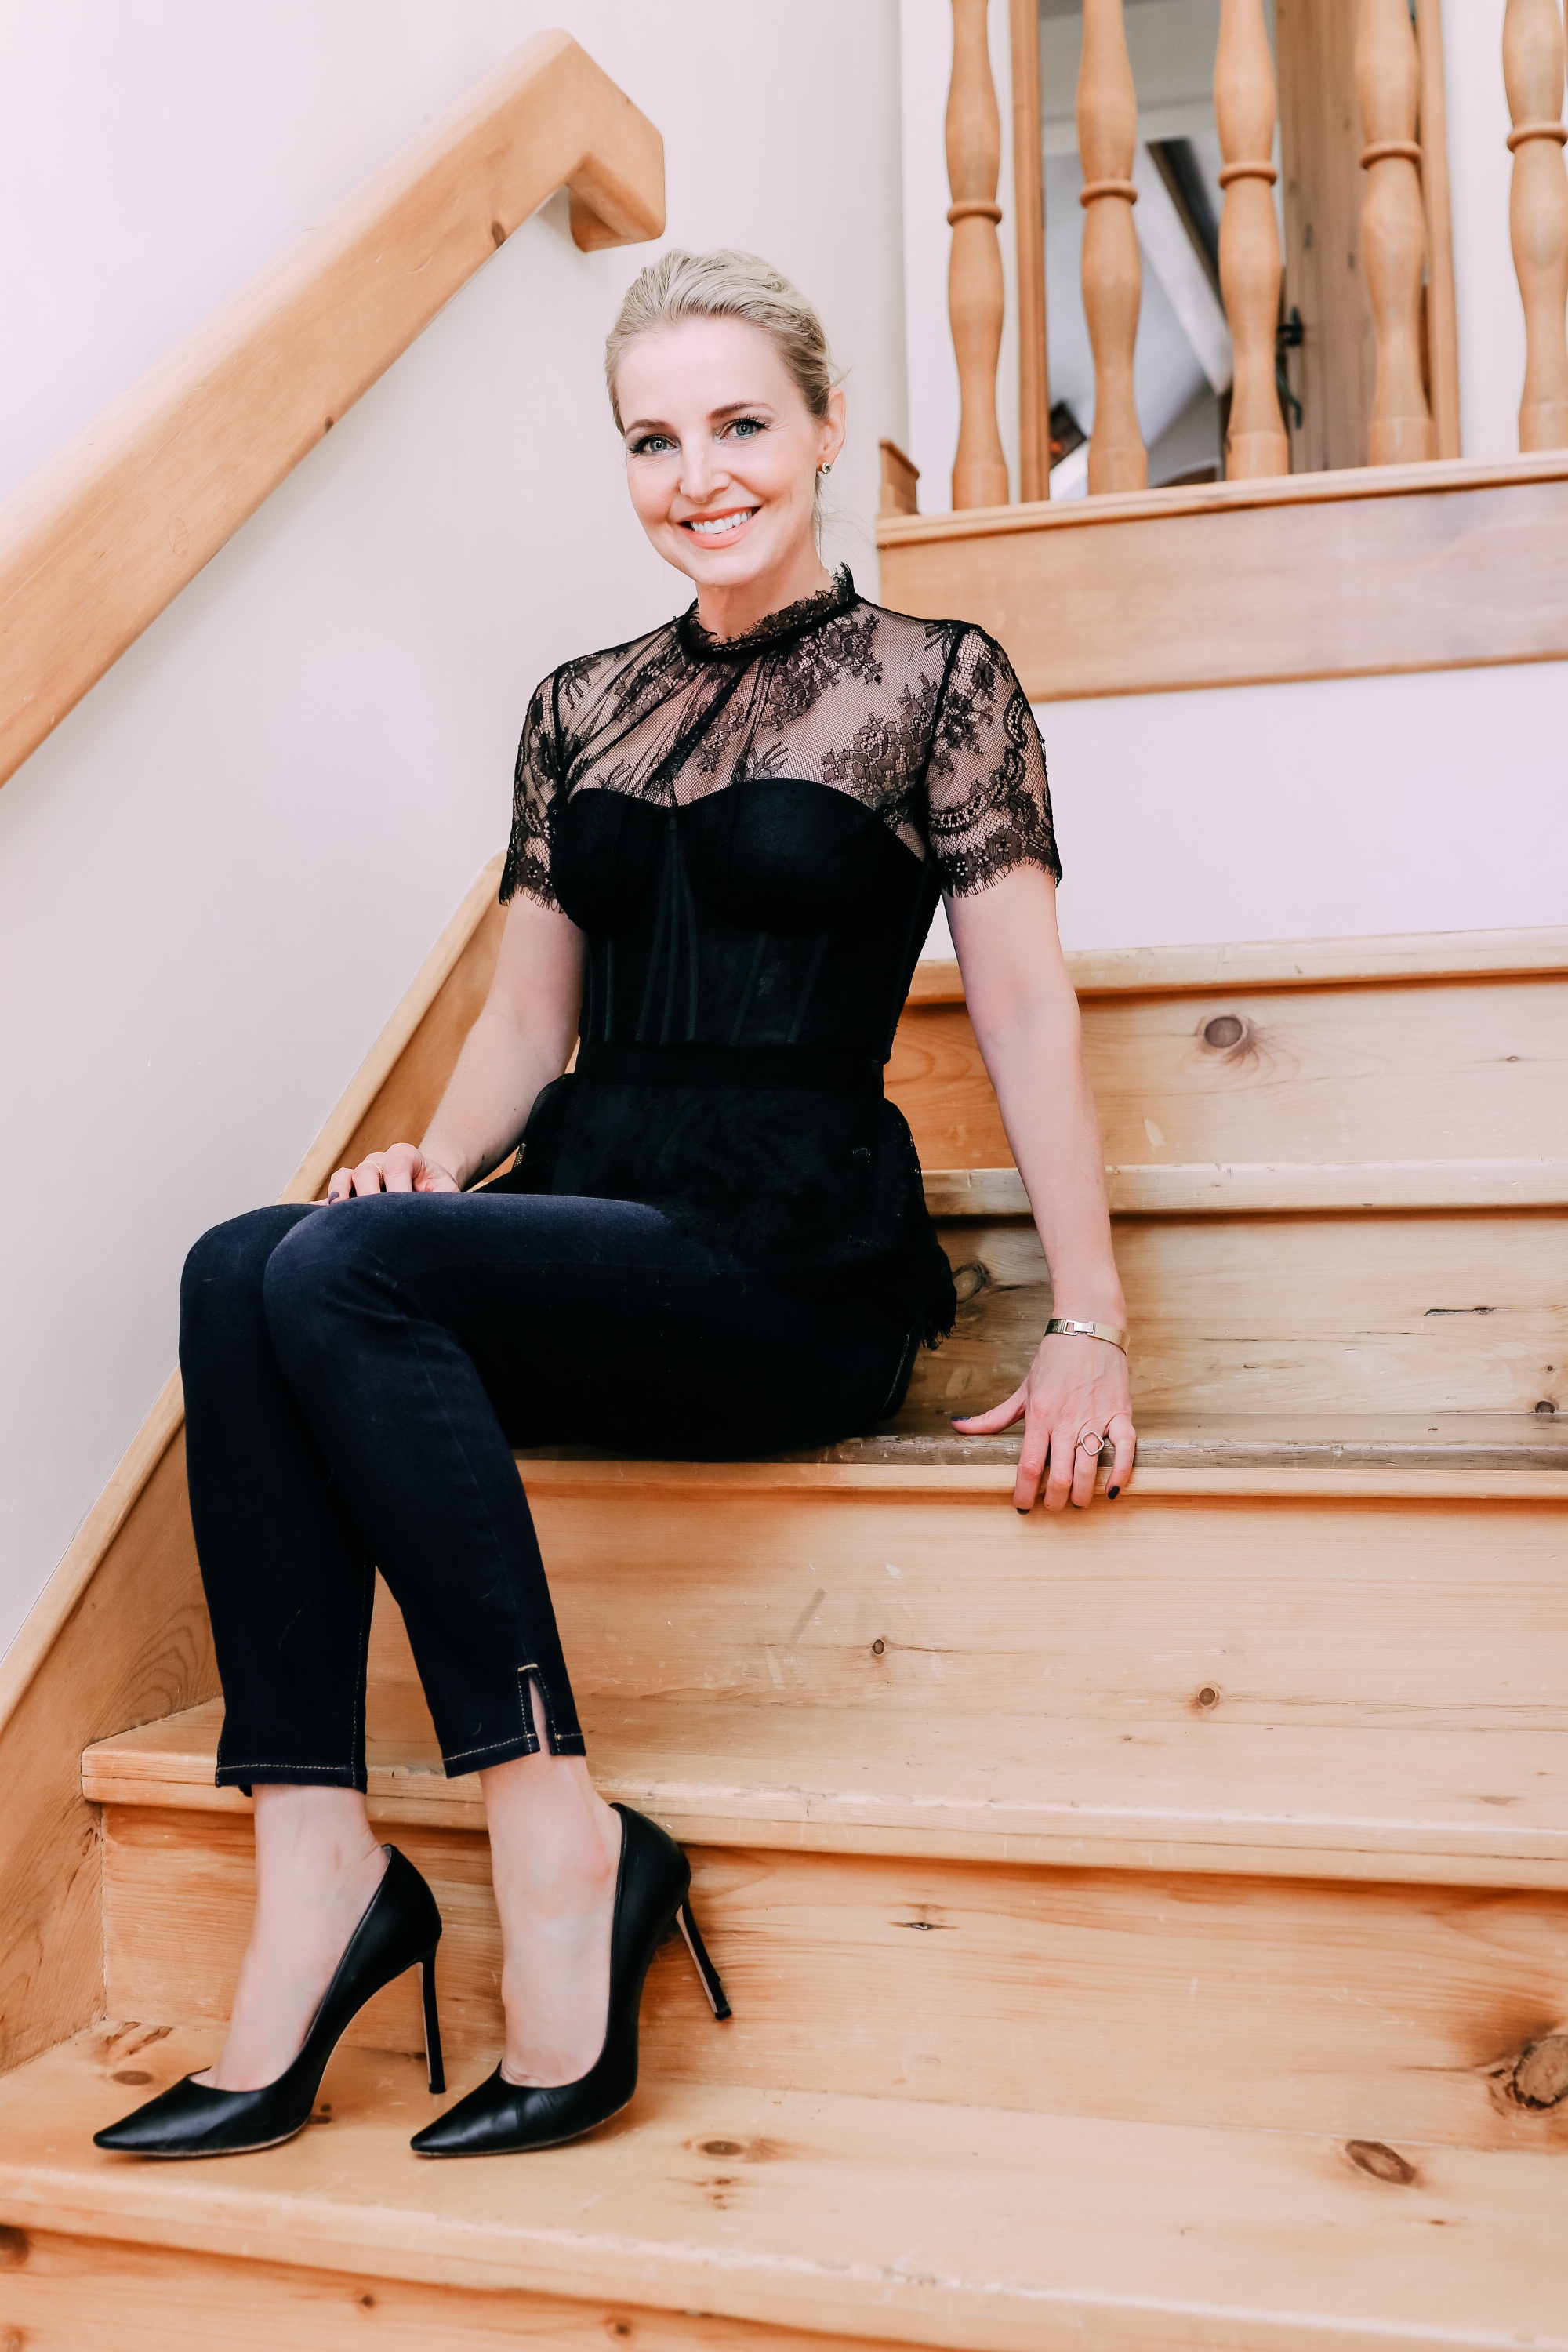 Holiday Outfits With Jeans, Erin Busbee of Busbee Style wearing a black lace corset top by Jonathan Simkhai, L'Agence dark wash skinny jeans, and black Jimmy Choo Romy pumps from Nordstrom in Telluride, Colorado